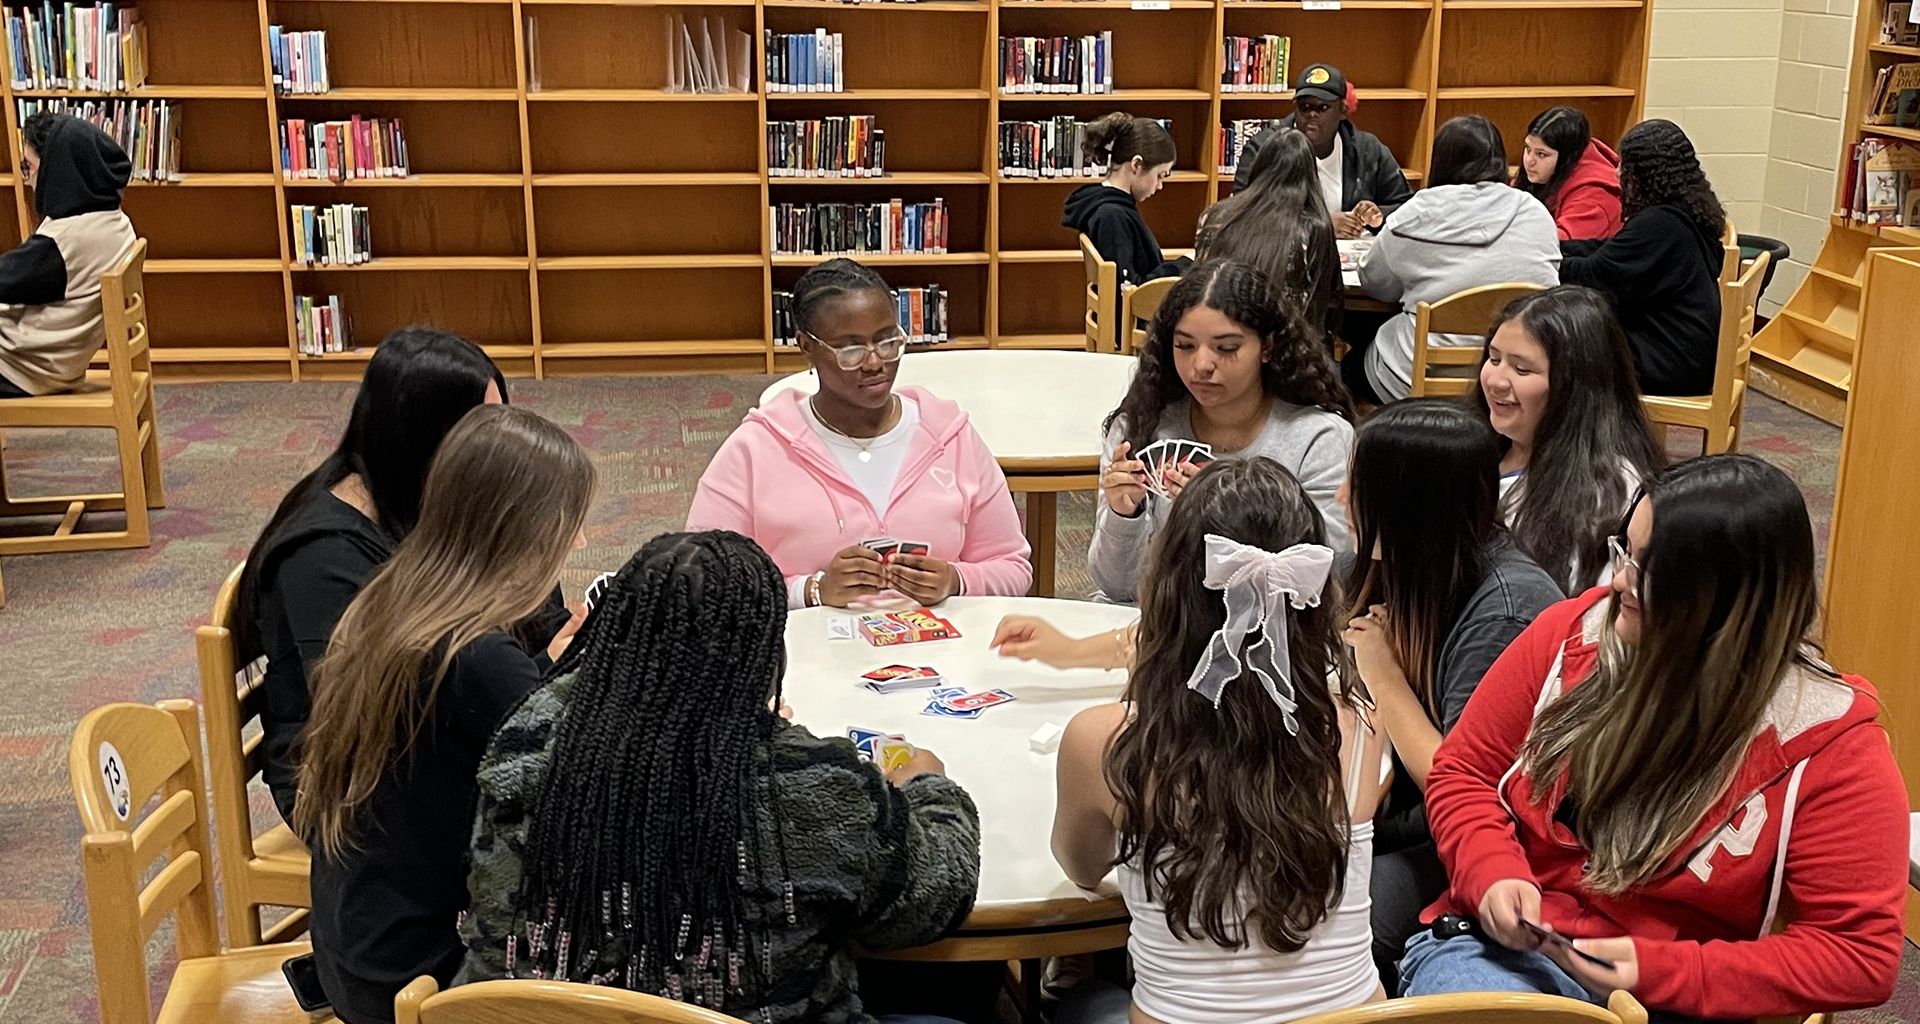 Students playing cards in library